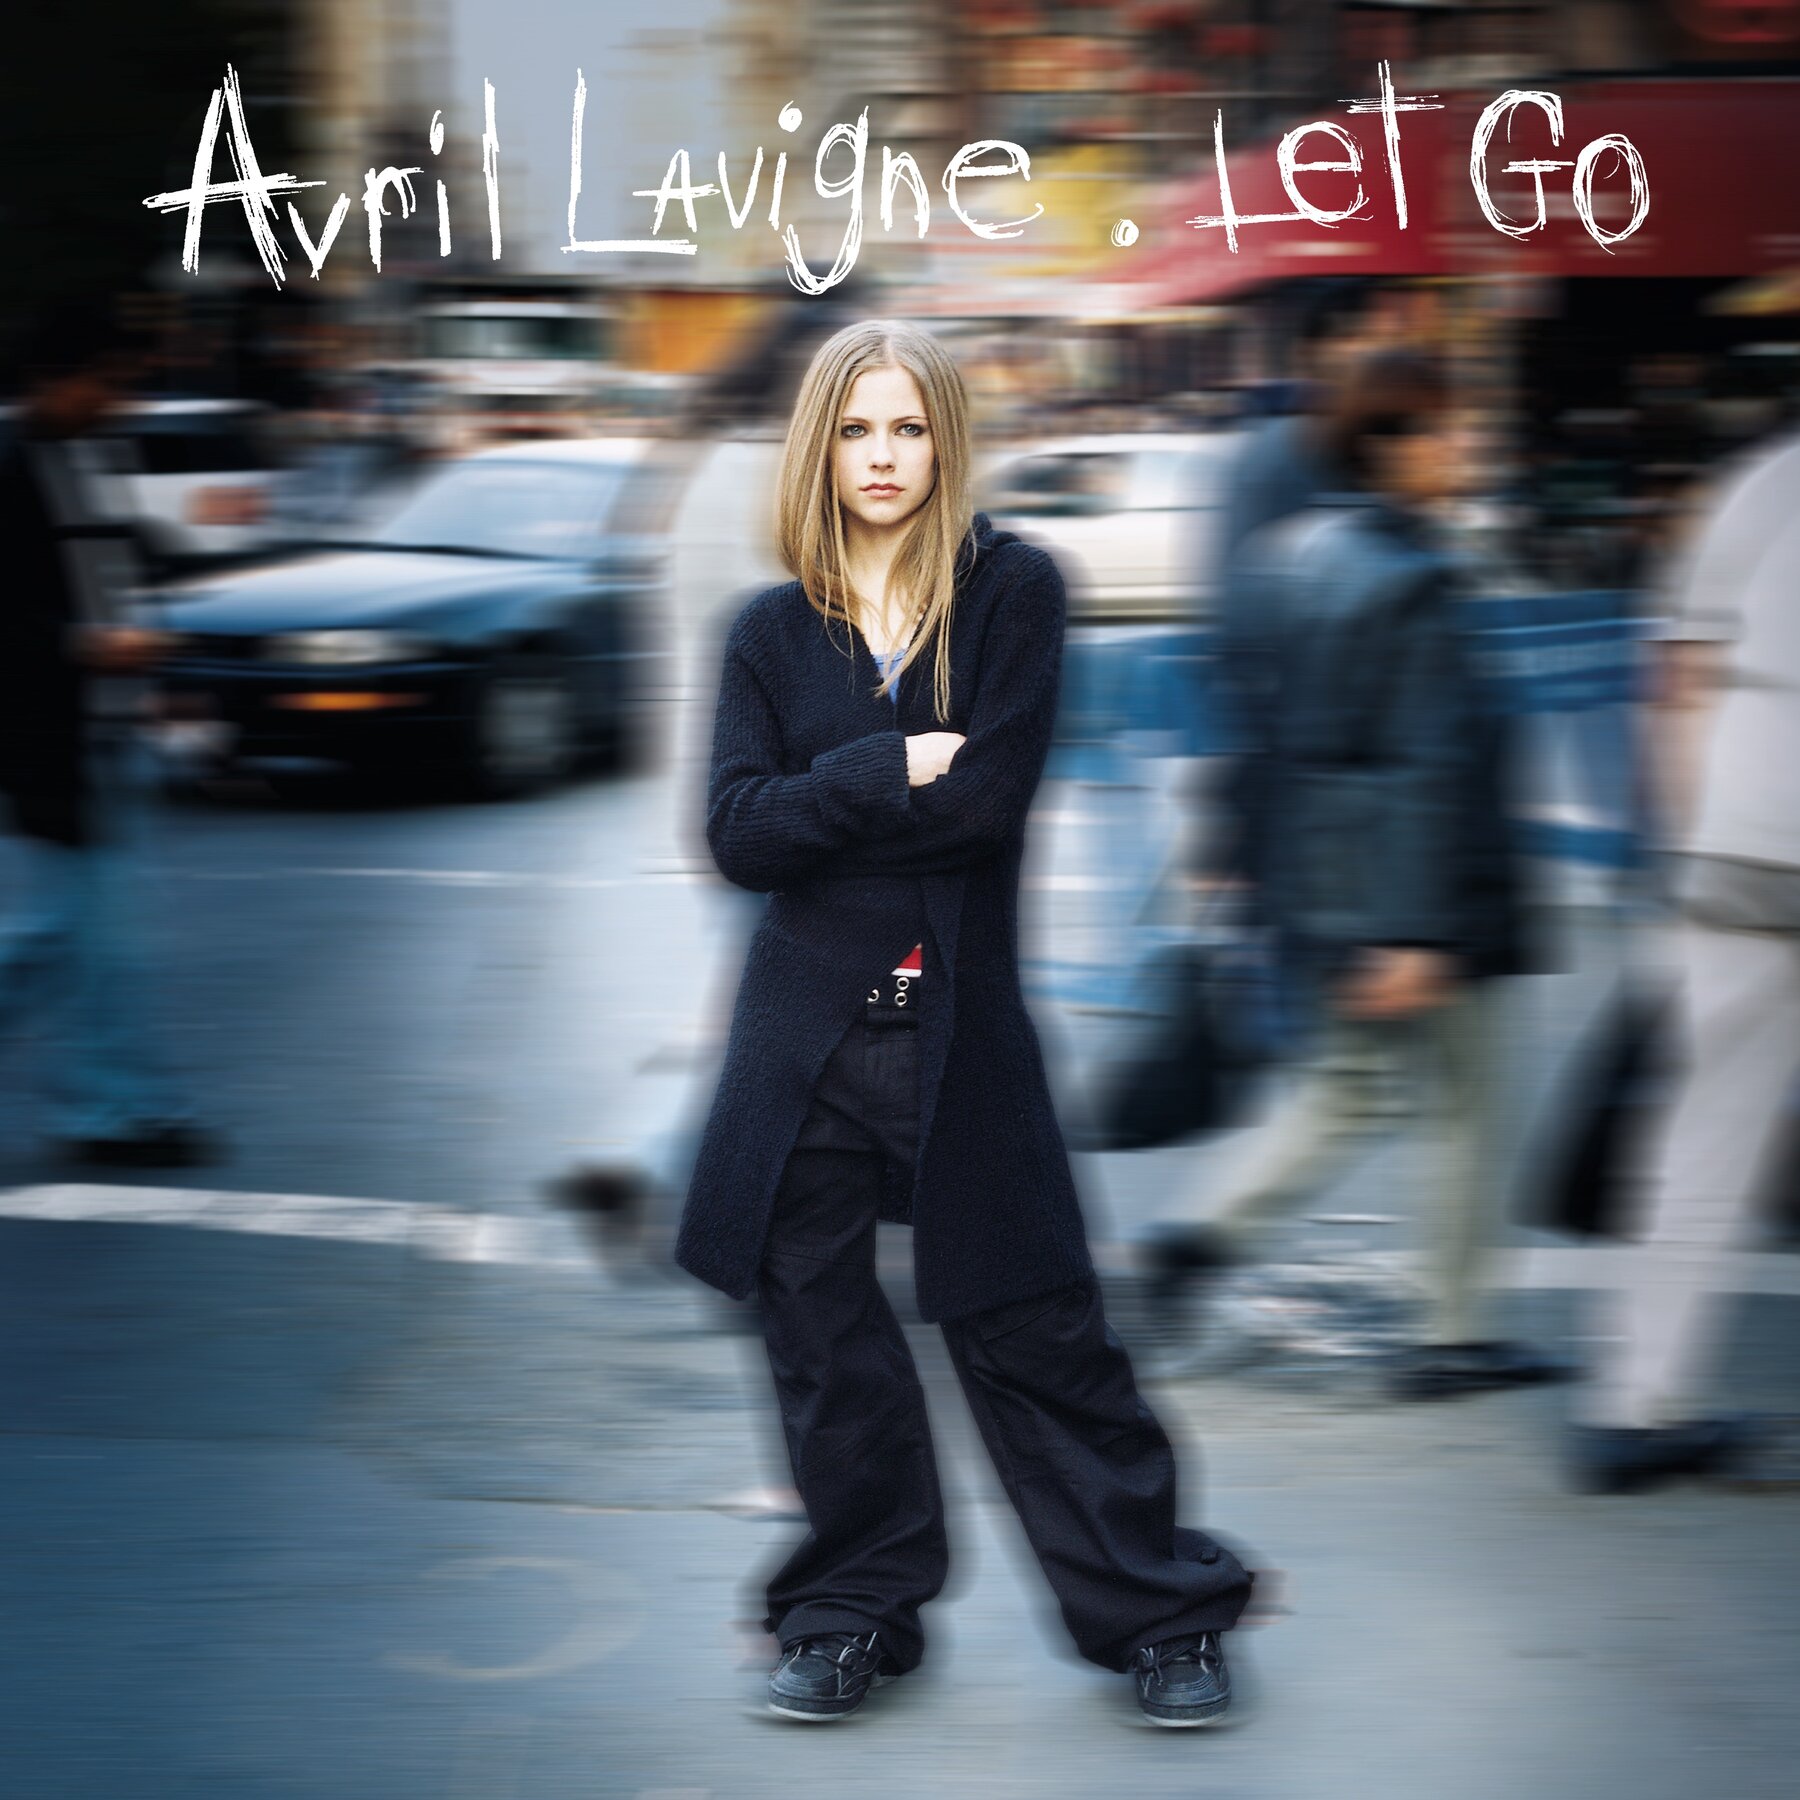 The cover for Avril Lavigne's Let Go album, with the text in a scratched font, and a blurred cover image of Lavigne, wearing all navy, with her arms crossed, standing on the street.